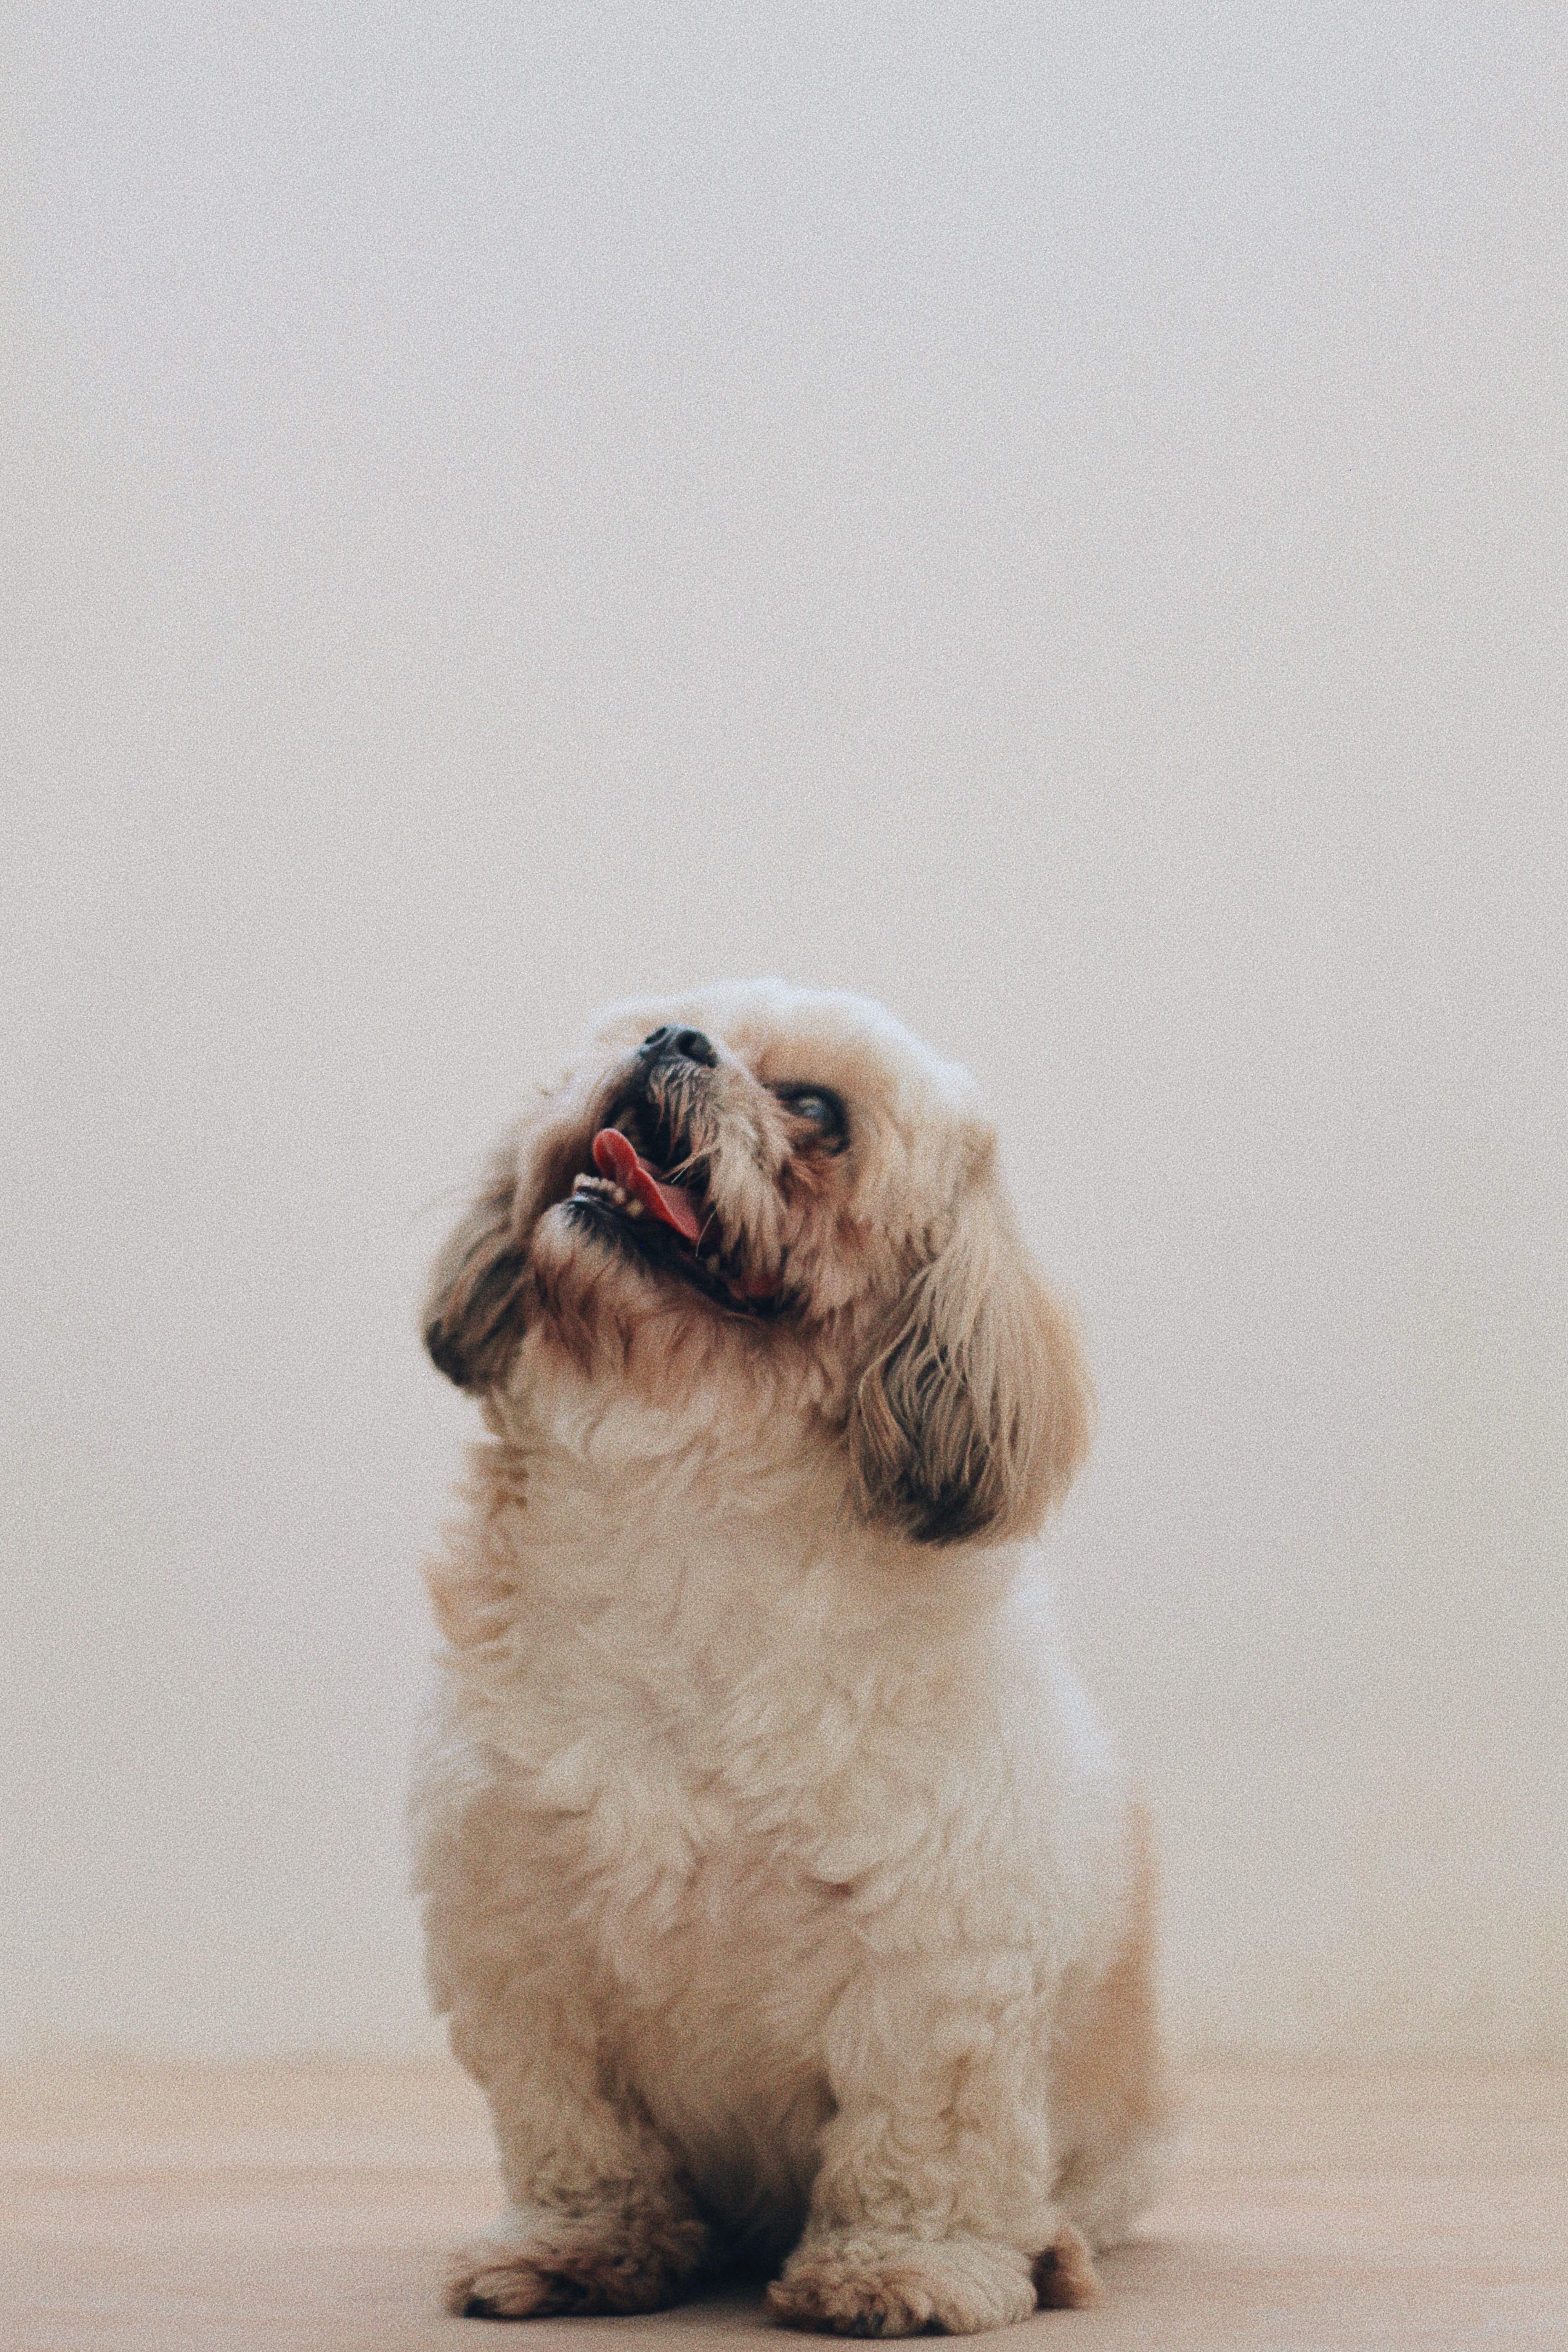 A fluffy white puppy looking up while he sits. | Source: Pexels/ Miguel Constantin Montes